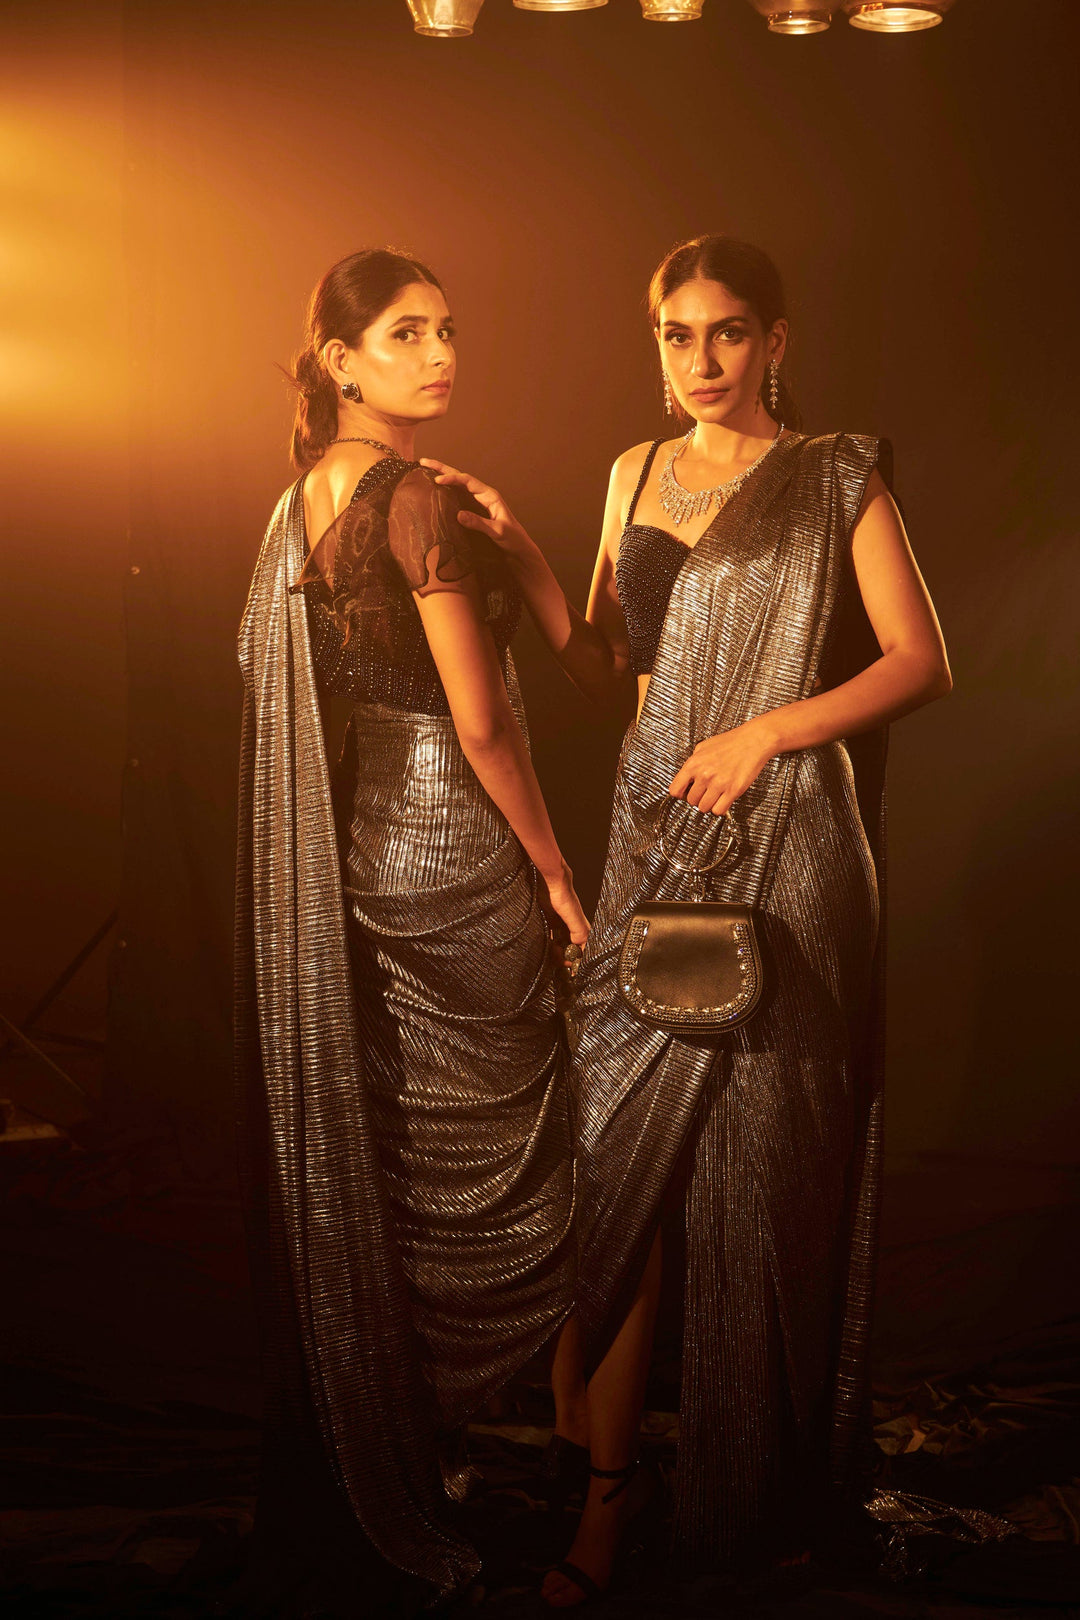 Saia metallic slit saree with an embellished pearl blouse will definitely make you look sassy and elegant in an event.  Tailored to perfection in a metallic fabric, the saree features a slit from the waist level and has an attached palla which creates a great fall.  It comes with a pearl embellished blouse with dori attachments on the back.